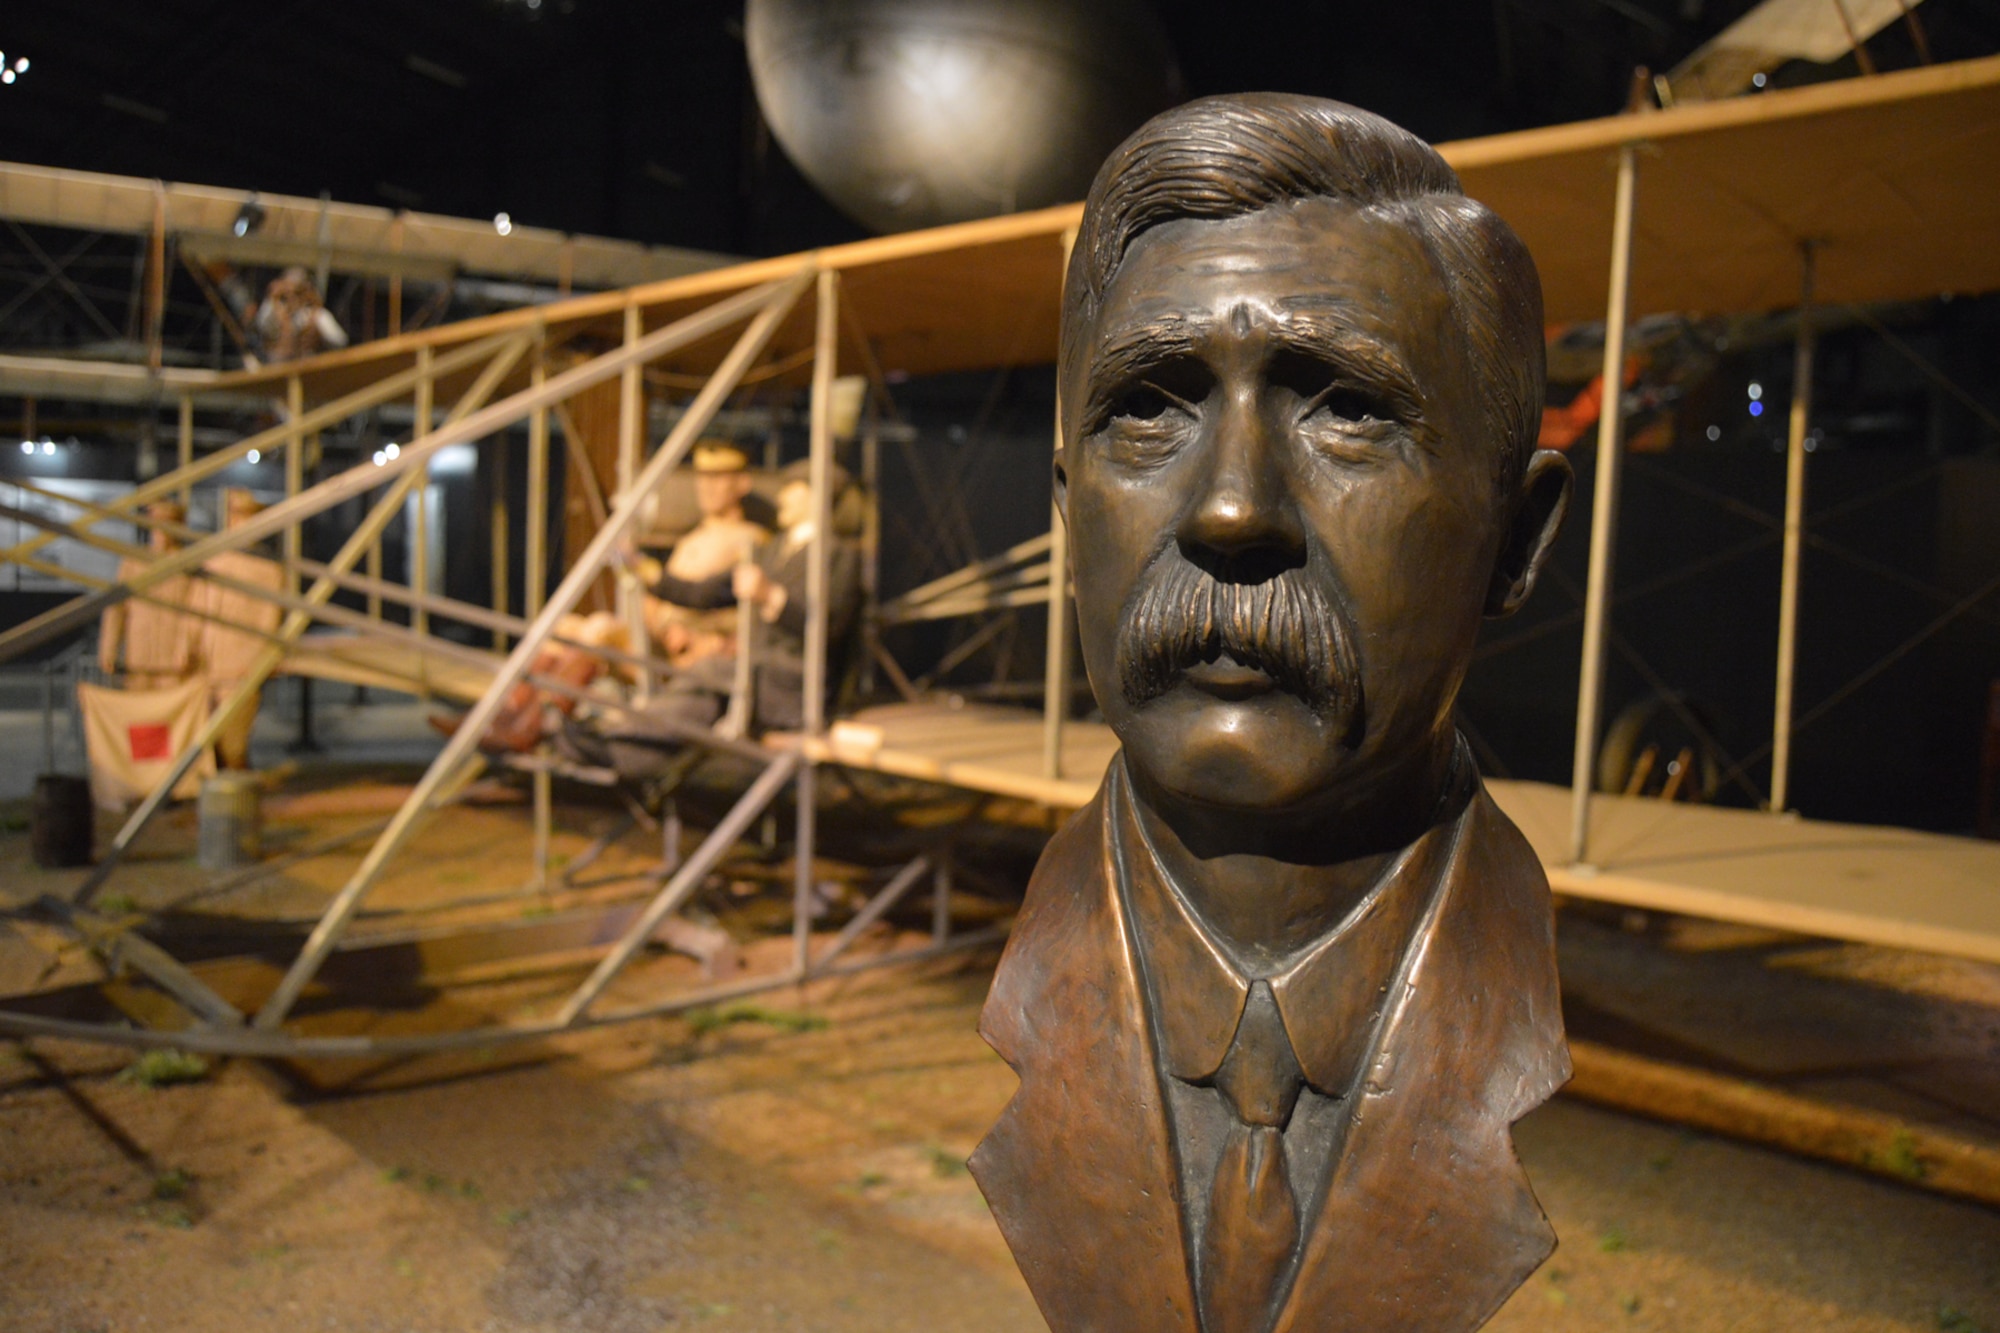 DAYTON, Ohio - A bronze bust honoring the first aviation mechanic, Charles E. Taylor, is now on permanent display in the National Museum of the U.S. Air Force's Early Years Gallery. (U.S. Air Force photo by Ken LaRock) 
